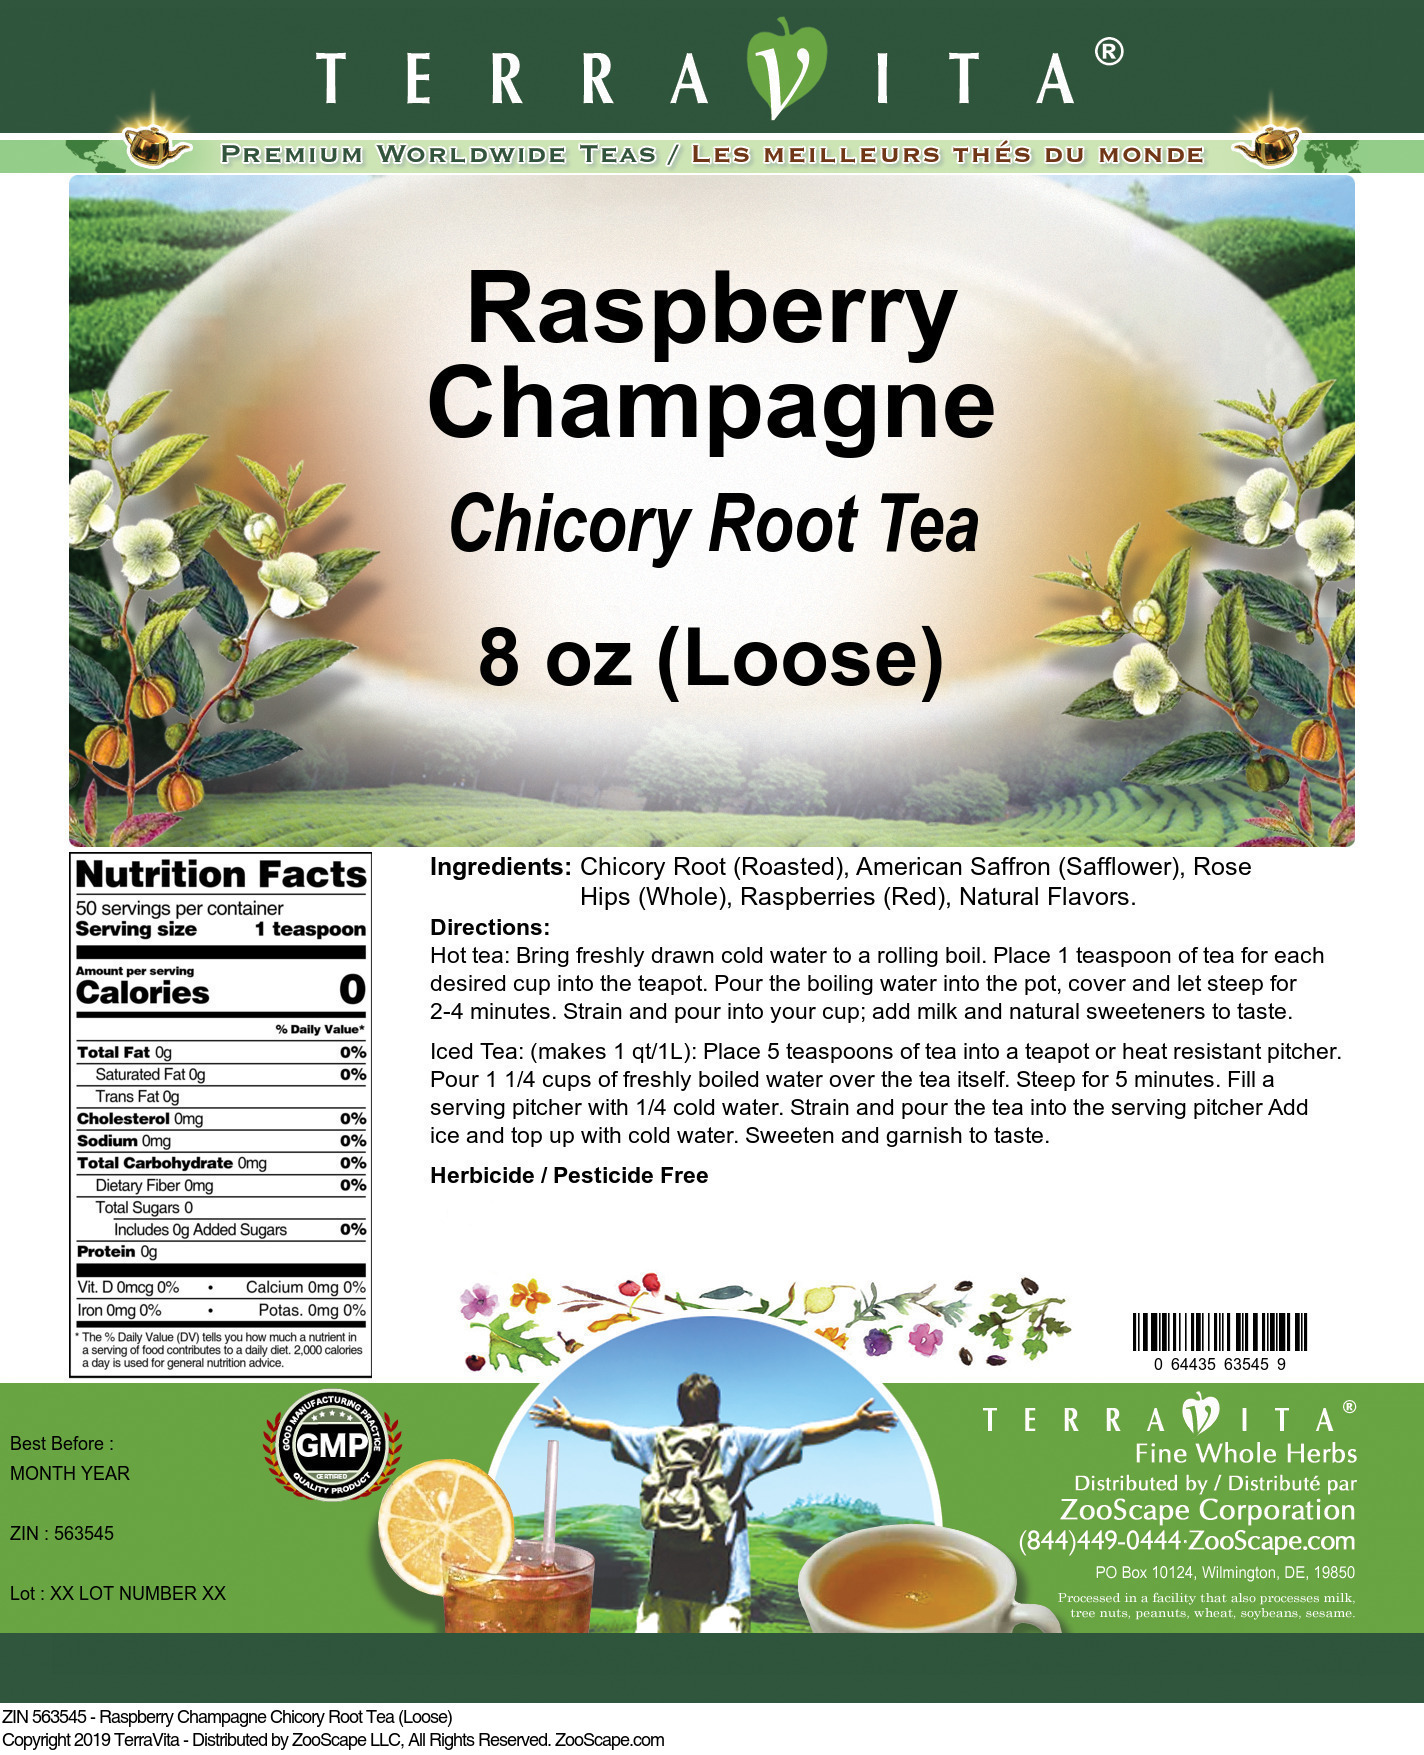 Raspberry Champagne Chicory Root Tea (Loose) - Label